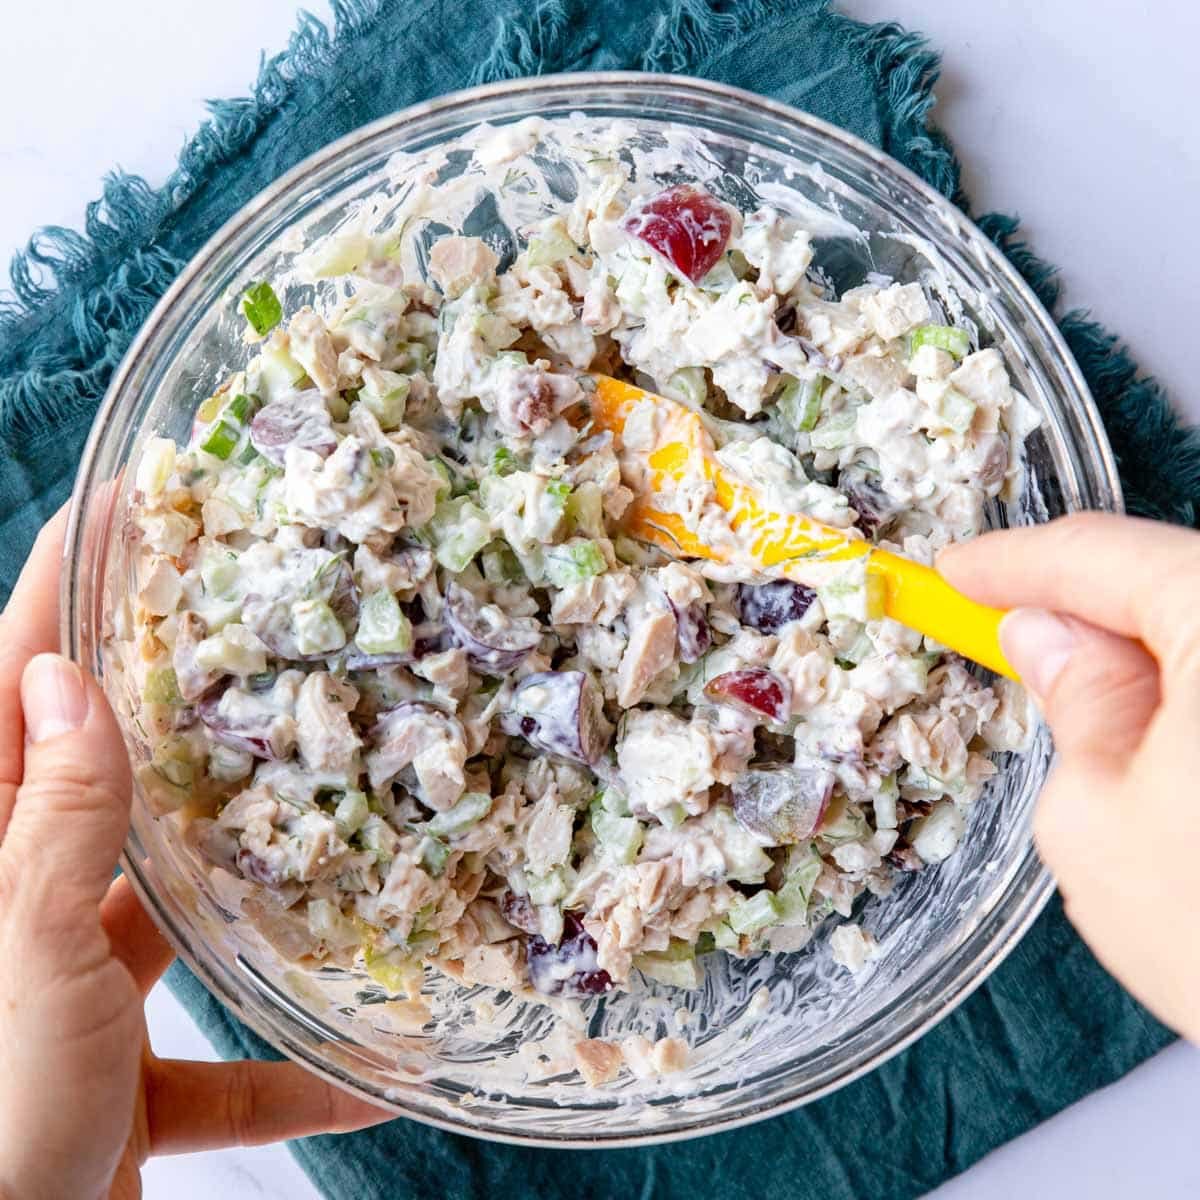 mixing chicken salad with grapes in a bowl